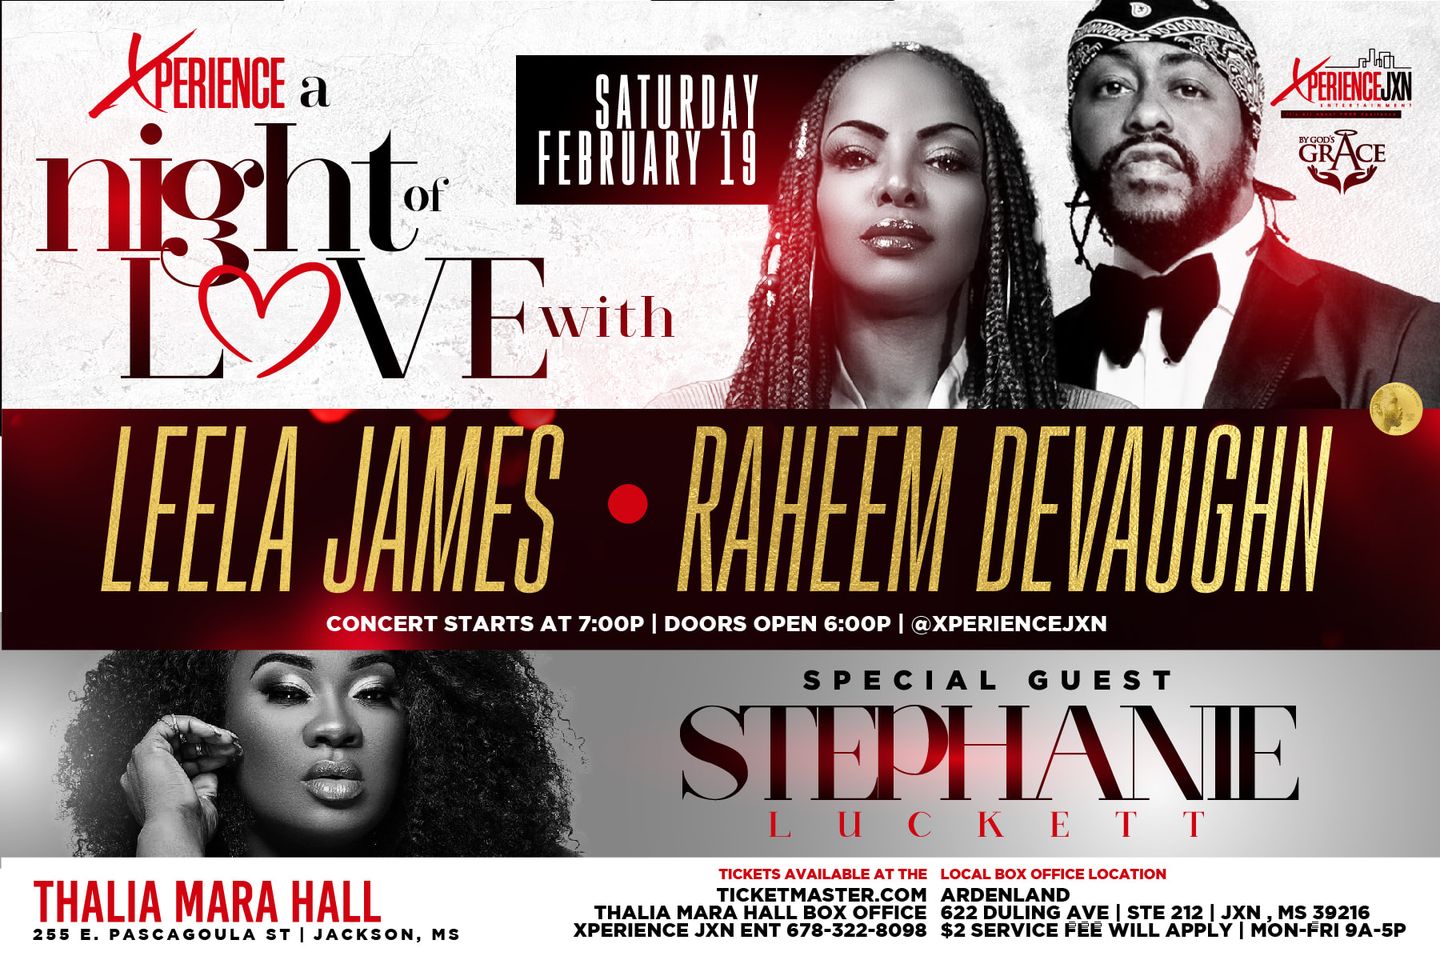 A Night of Love with Leela James and Raheem Devaughn